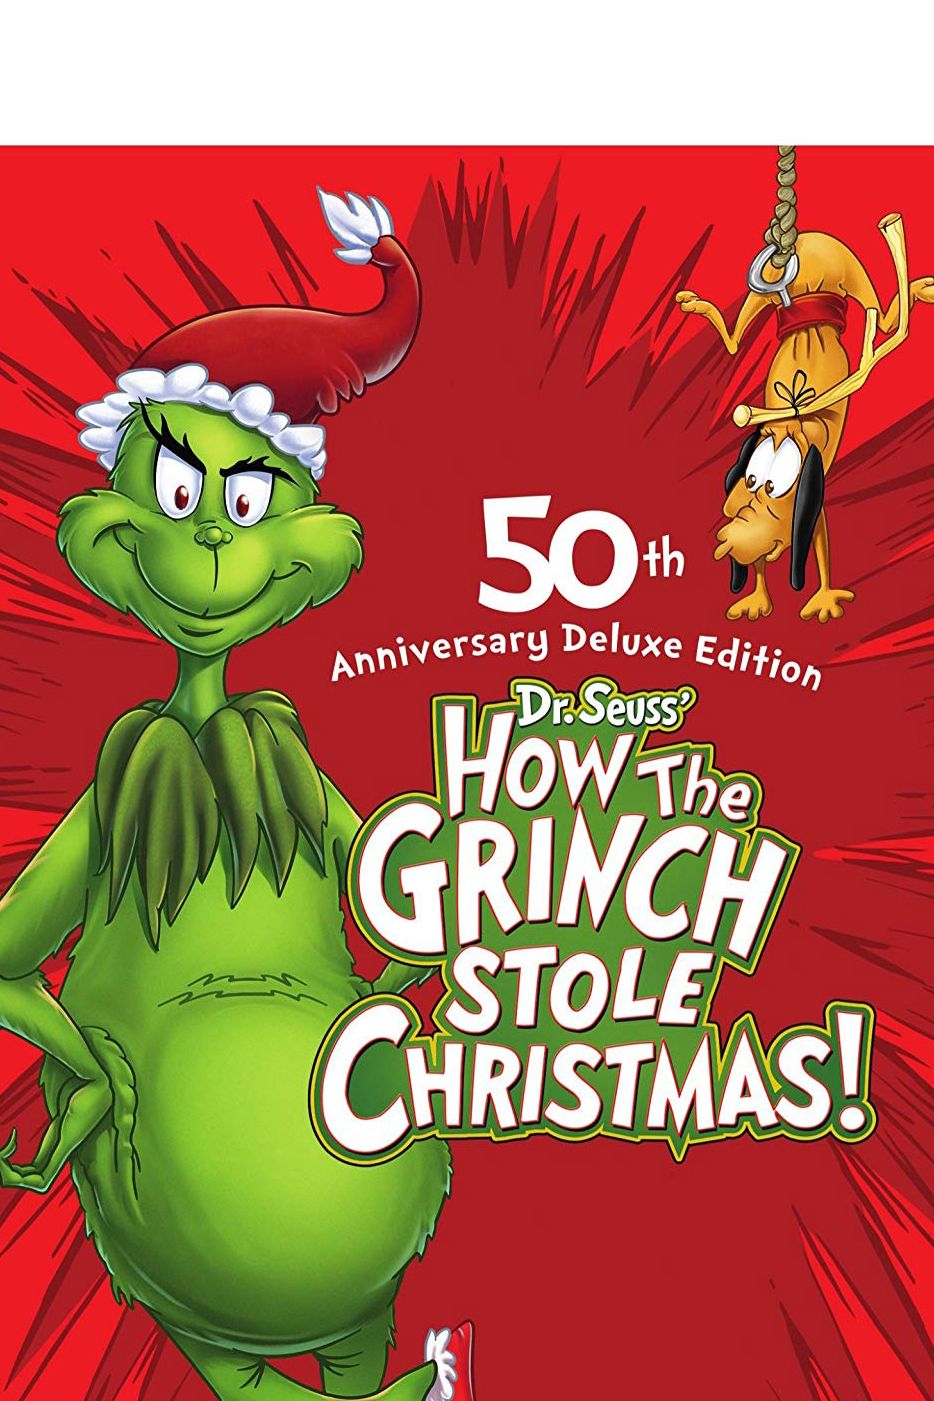 how the grinch stole christmas - best christmas movies